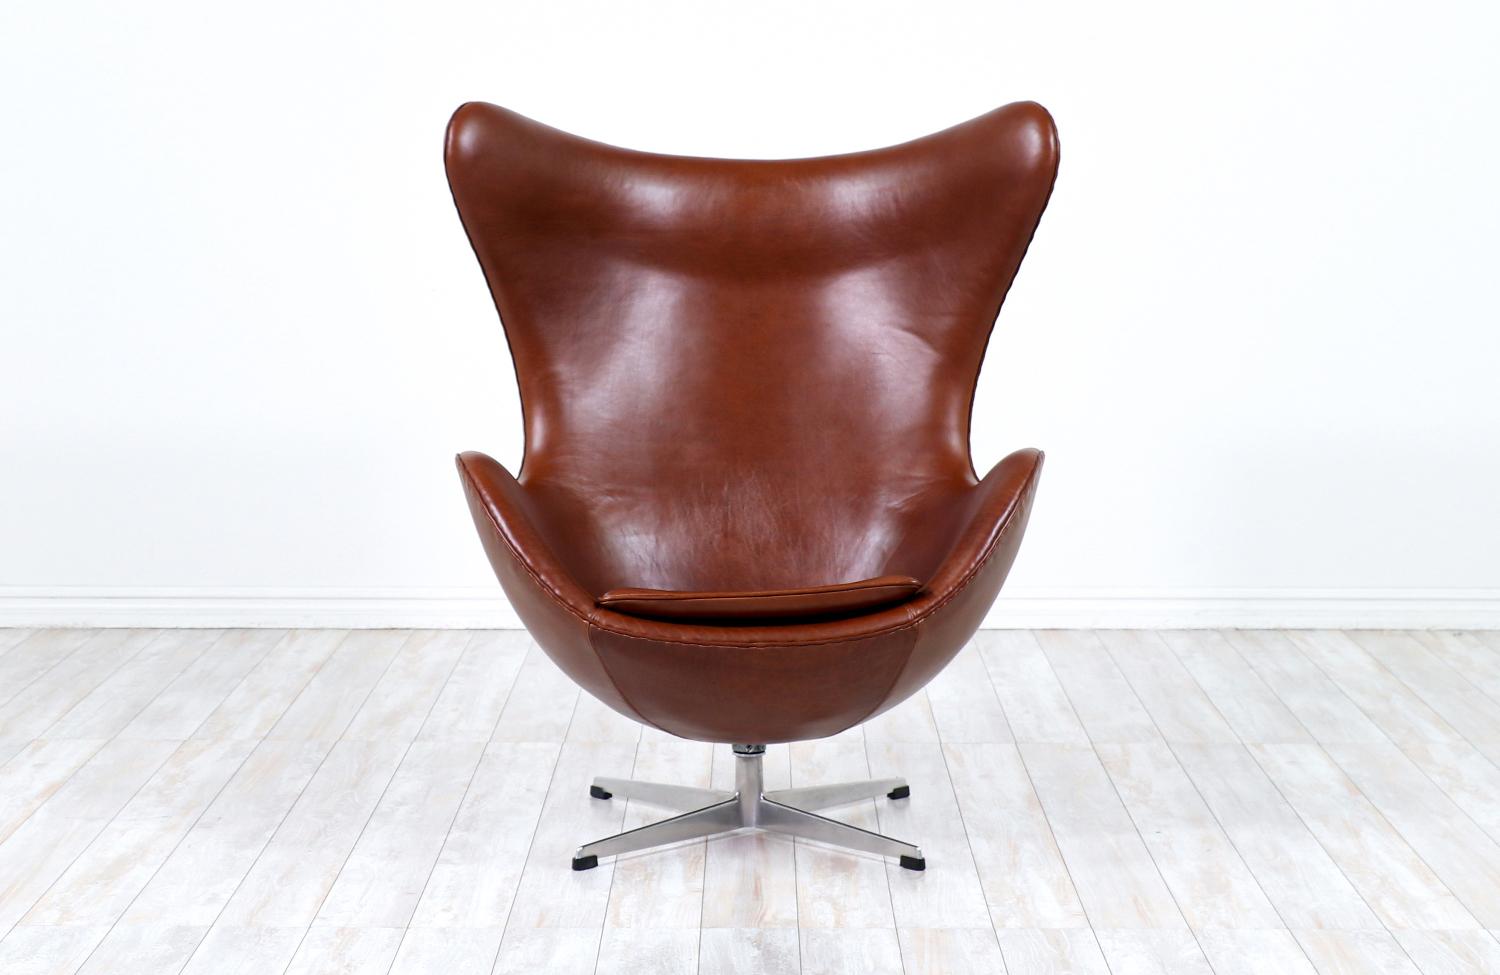 Mid-Century Modern Expertly Restored - Danish Modern Cognac Leather “Egg” Chair by Arne Jacobsen For Sale